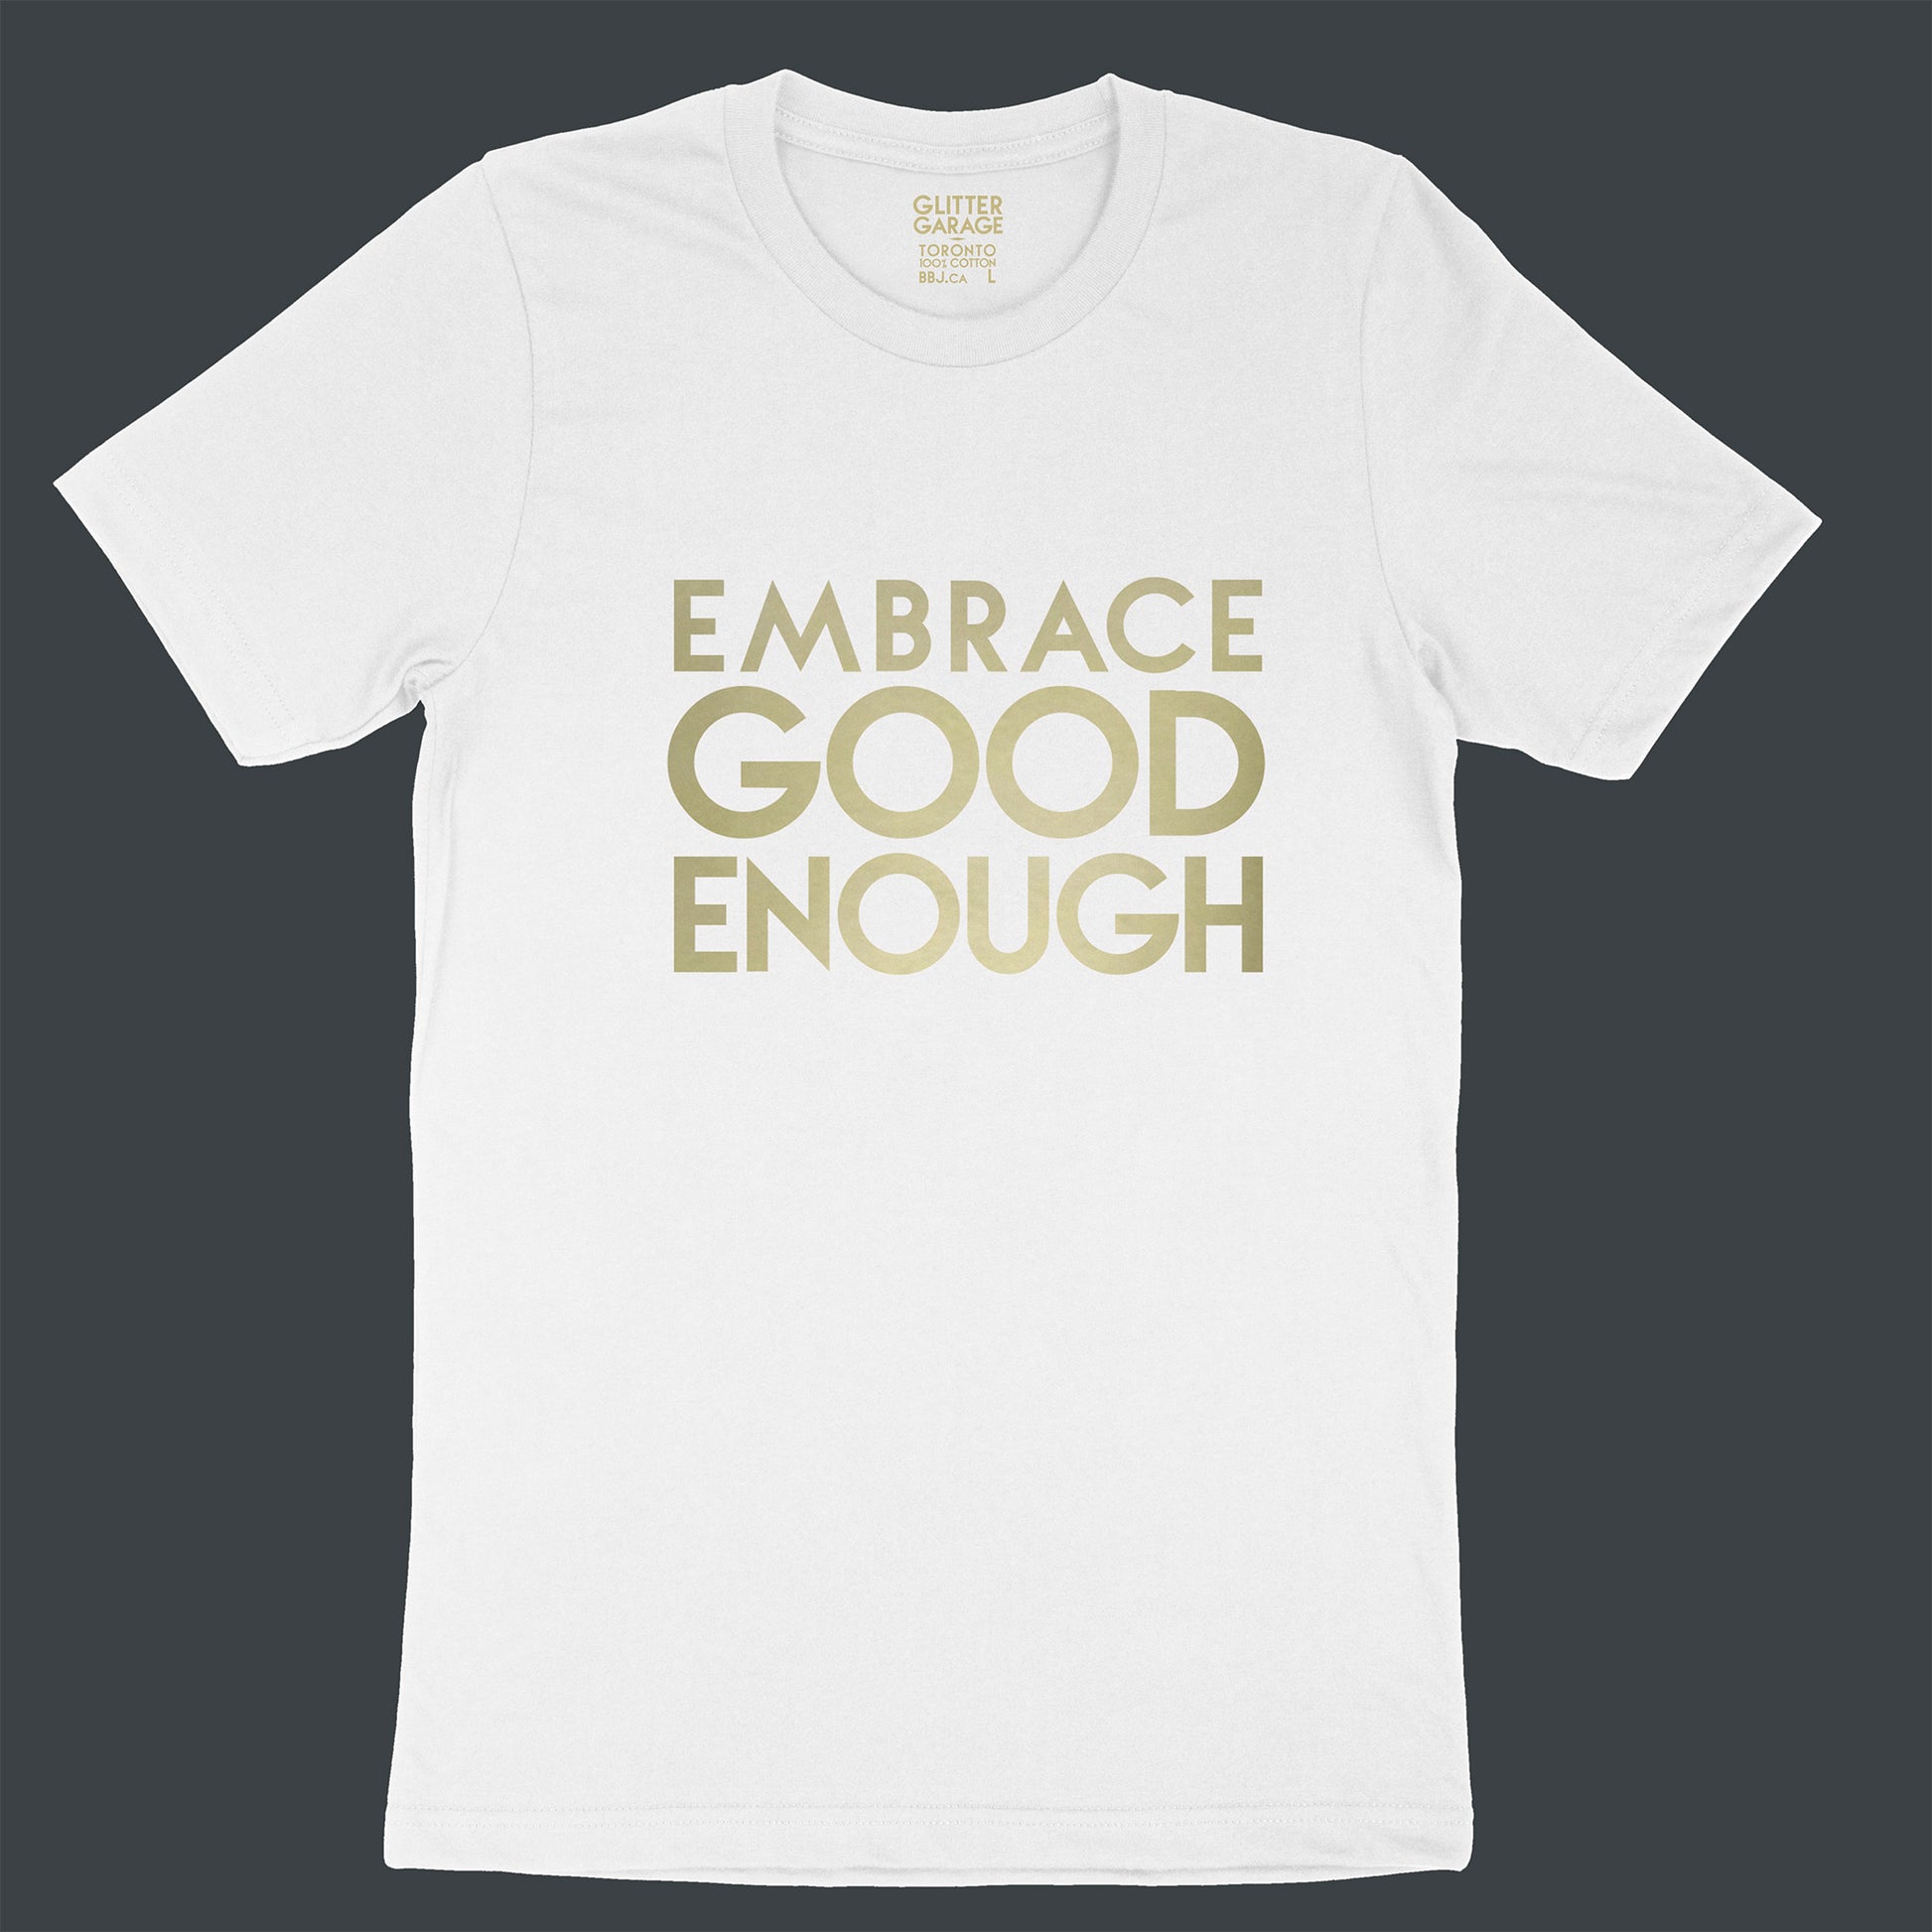 Custom text tee - Embrace Good Enough - gold matte - USE YOUR WORDS white unisex t-shirt by BBJ / Glitter Garage